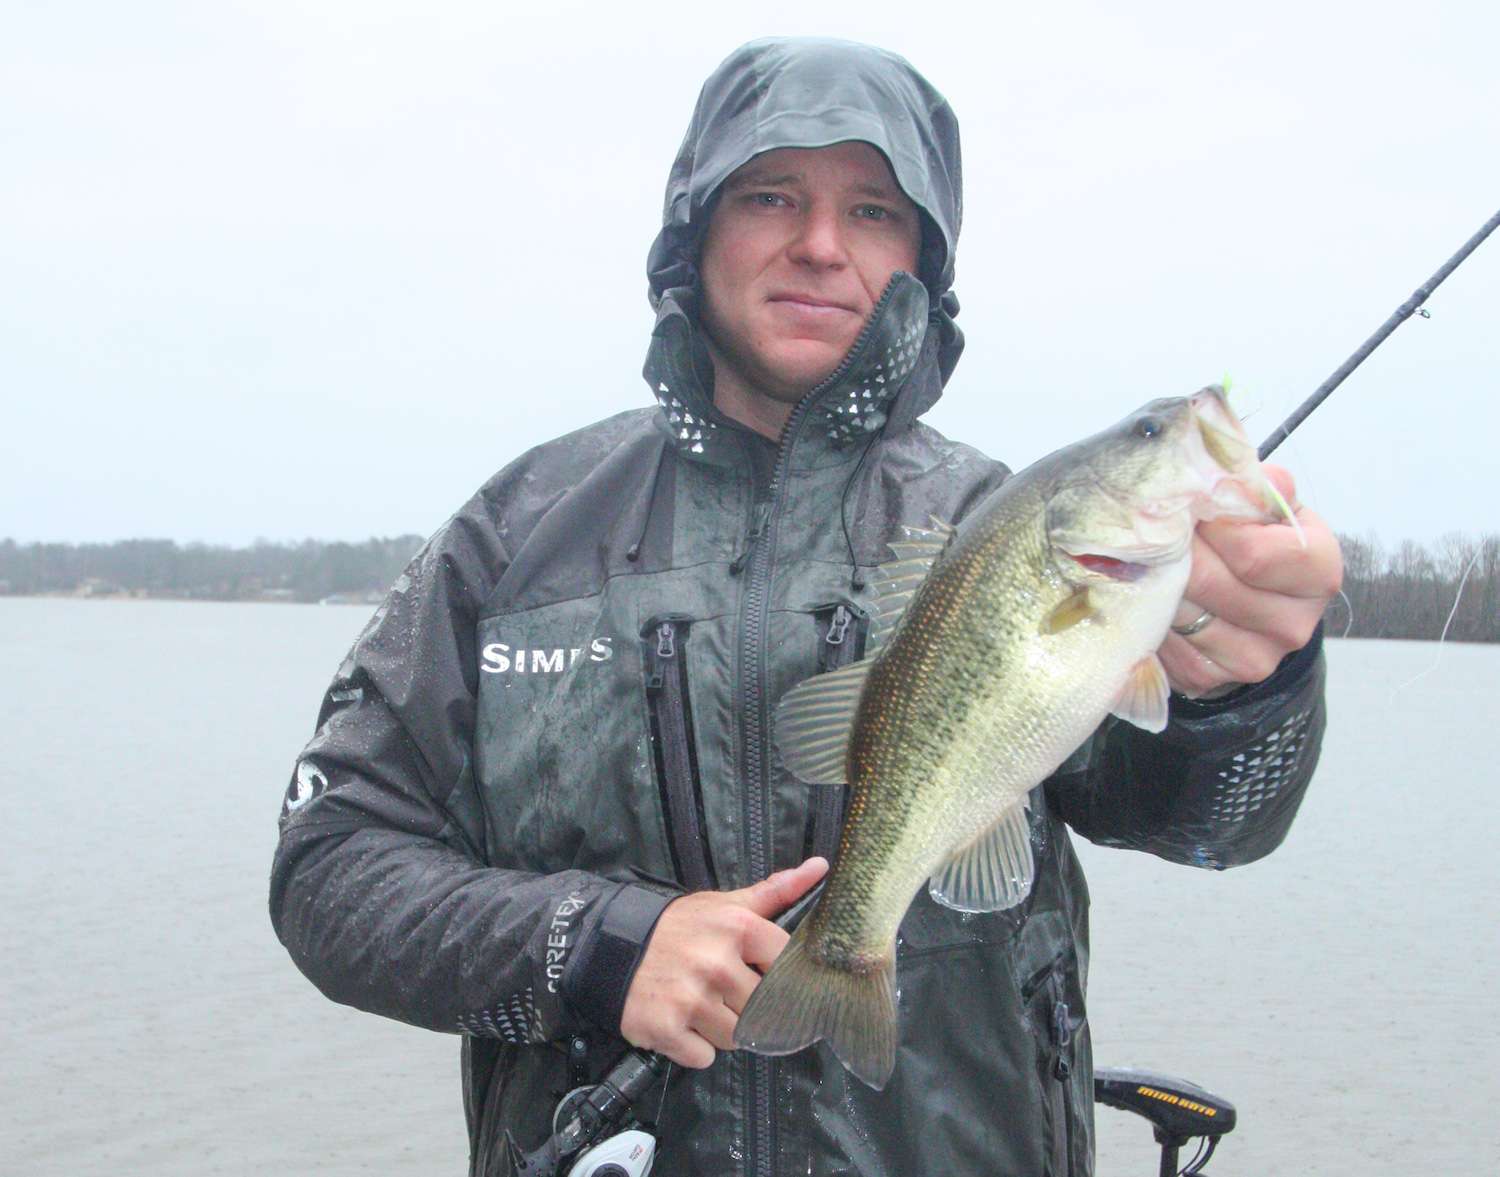 <b>6 HOURS LEFT</b><br>
<b>8 a.m.</b> Frazier moves to a steep Â­tributary bank and casts the spinnerbait, buzzbait and bladed jig around flooded wood cover. <br>
<b>8:15 a.m.</b> Frazier casts the One Knocker to the middle of the creek arm. âThereâs a hump out there with some scattered stumps on it.â <br>
<b>8:22 a.m.</b> He slow rolls a white 1/2-ounce War Eagle spinnerbait across a submerged log at the mouth of the tributary and gets a short strike. <br>
<b>8:24 a.m.</b> Back to the buzzbait. No takers on it yet. <br>
<b>8:26 a.m.</b> Frazier drops his Power-Poles and pitches the jig into a flooded tree branch. 
<b>8:34 a.m.</b> Frazier runs to the extreme upper end of the lake, where muddy water is gushing in via a flooded creek. He casts the chartreuse and white spinnerbait around the flooded backwater. âIâd feel better about this spot if the runoff were warmer than the lake water, but itâs all the same temperature.â <br>
<b>8:40 a.m.</b> Frazier gets a hellacious strike on the bladed jig, but it turns out to be a 10-pound channel catfish! He releases the cat. âThat slimy sucker knocked 3 feet of slack in my line!â <br>
<b>8:51 a.m.</b> Frazier is alternating between the bladed jig and lipless crankbait without success. âThis waterâs totally trashed up here. I donât like cold, fresh, inflowing mud.â
	<p>
<b>5 HOURS LEFT</b><br>
<b>9 a.m.</b> Itâs still pouring rain. Frazier has speed trolled 100 yards downlake to a flooded bank with slightly clearer water. He casts the chartreuse and white spinnerbait to a laydown and catches keeper No. 2, 1 pound, 8 ounces. âLike that big fish, this one hit pretty close to the boat. They seem to be following the lure out from cover.â <br>
<b>9:16 a.m.</b> Frazier idles to a channel bank to try the chartreuse and white spinnerbait and the bladed jig. âTheyâll use a steep bank like this when moving from deep to shallow water.â <br>
<b>9:25 a.m.</b> Frazier runs straight across the lake to hit a series of shallow âpocketsâ (shoreline indentations) with his lure arsenal. âThe lakeâs rising way back into the woods. The bass could be anywhere.â <br>
<b>9:36 a.m.</b> Frazier combs a flooded fence with the white spinnerbait but hauls water. âCome on, bass, youâre supposed to be holding tight to cover!â <br>
<b>9:48 a.m.</b> Frazier casts the bladed jig to a flooded duck blind on a shallow point. The rain has let up some, but the wind has picked up and itâs noticeably colder. âI need to put five fish in the boat fast! Itâll get even tougher once that cold front blows through.â
<p>
<b>4 HOURS LEFT</b><br>
<b>10 a.m.</b> A fish taps the white spinnerbait near a submerged tree but doesnât hook up. <br>
<b>10:10 a.m.</b> The rain has stopped. Frazier makes a high-speed run down lake to a small island, where he casts the chartreuse and white spinnerbait to a tangle of flooded branches.
